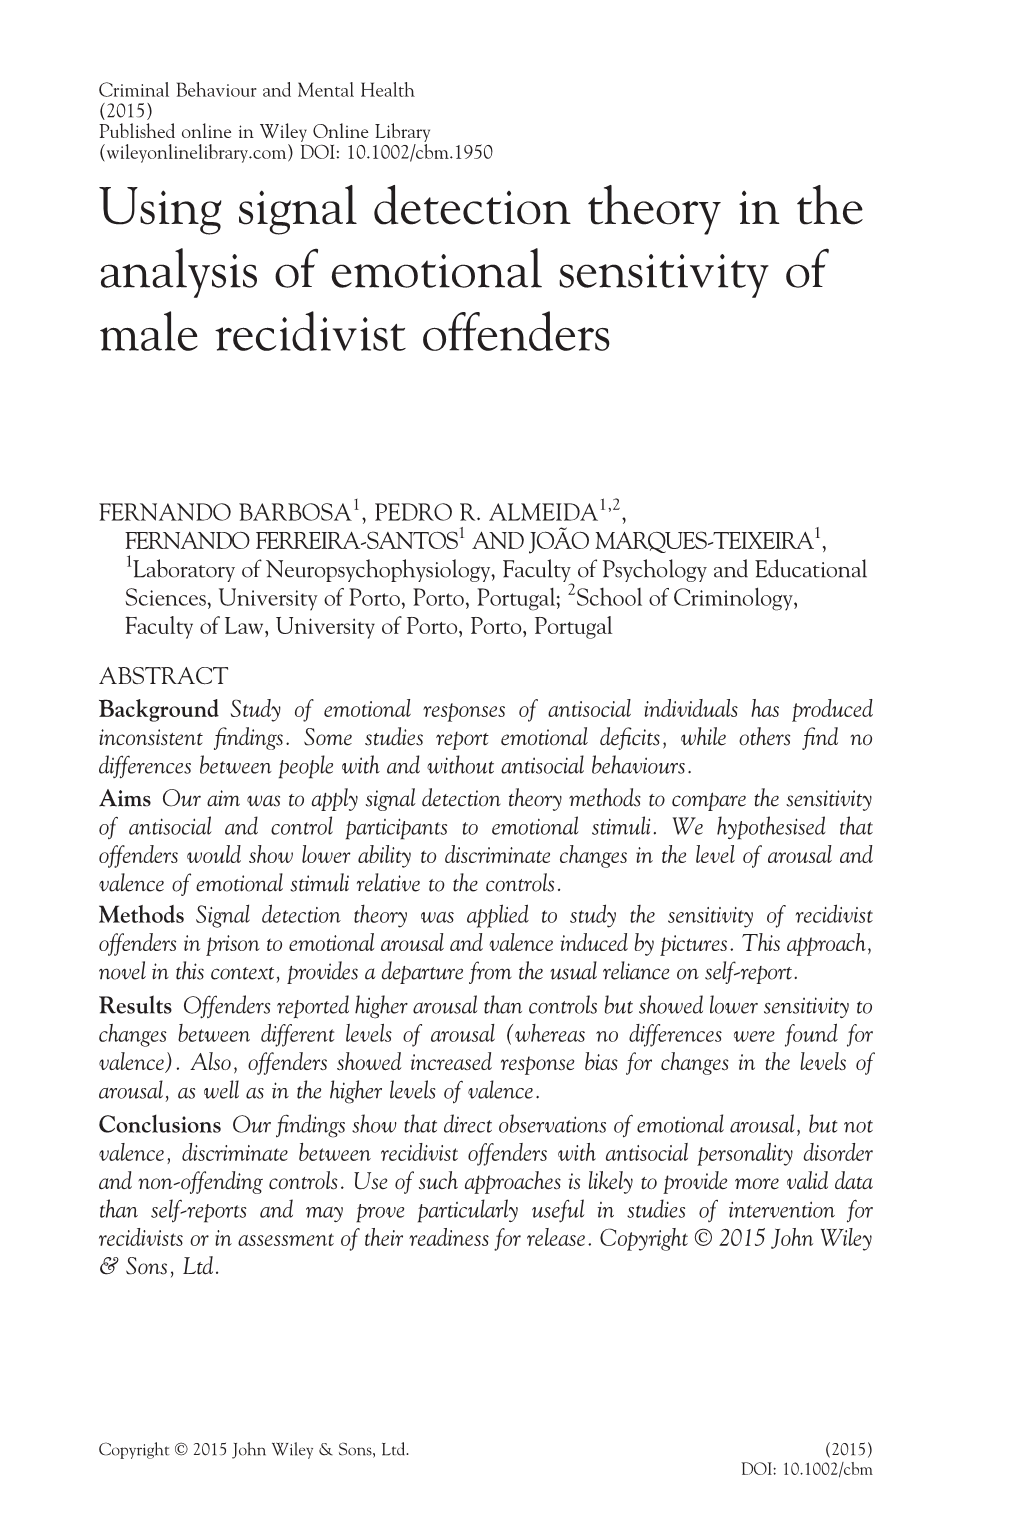 Using Signal Detection Theory in the Analysis of Emotional Sensitivity of Male Recidivist Offenders